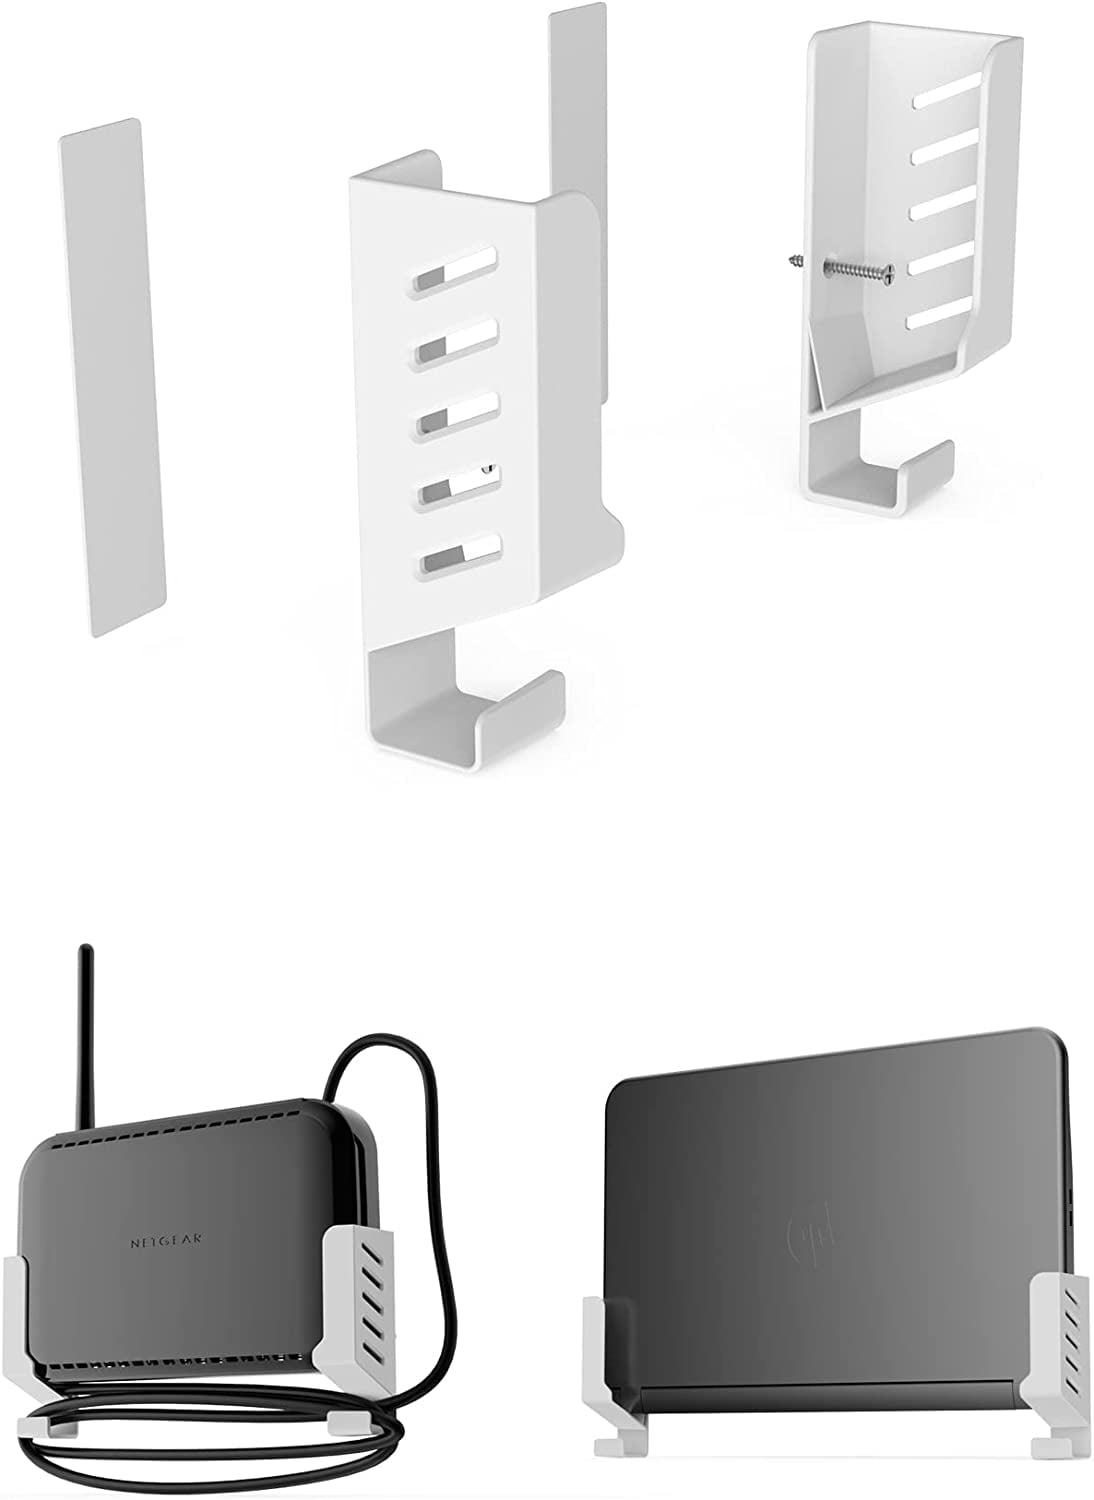 Wifi Router Rack Box Shelf Storage Wall Mounted Wireless Cable Home Decor